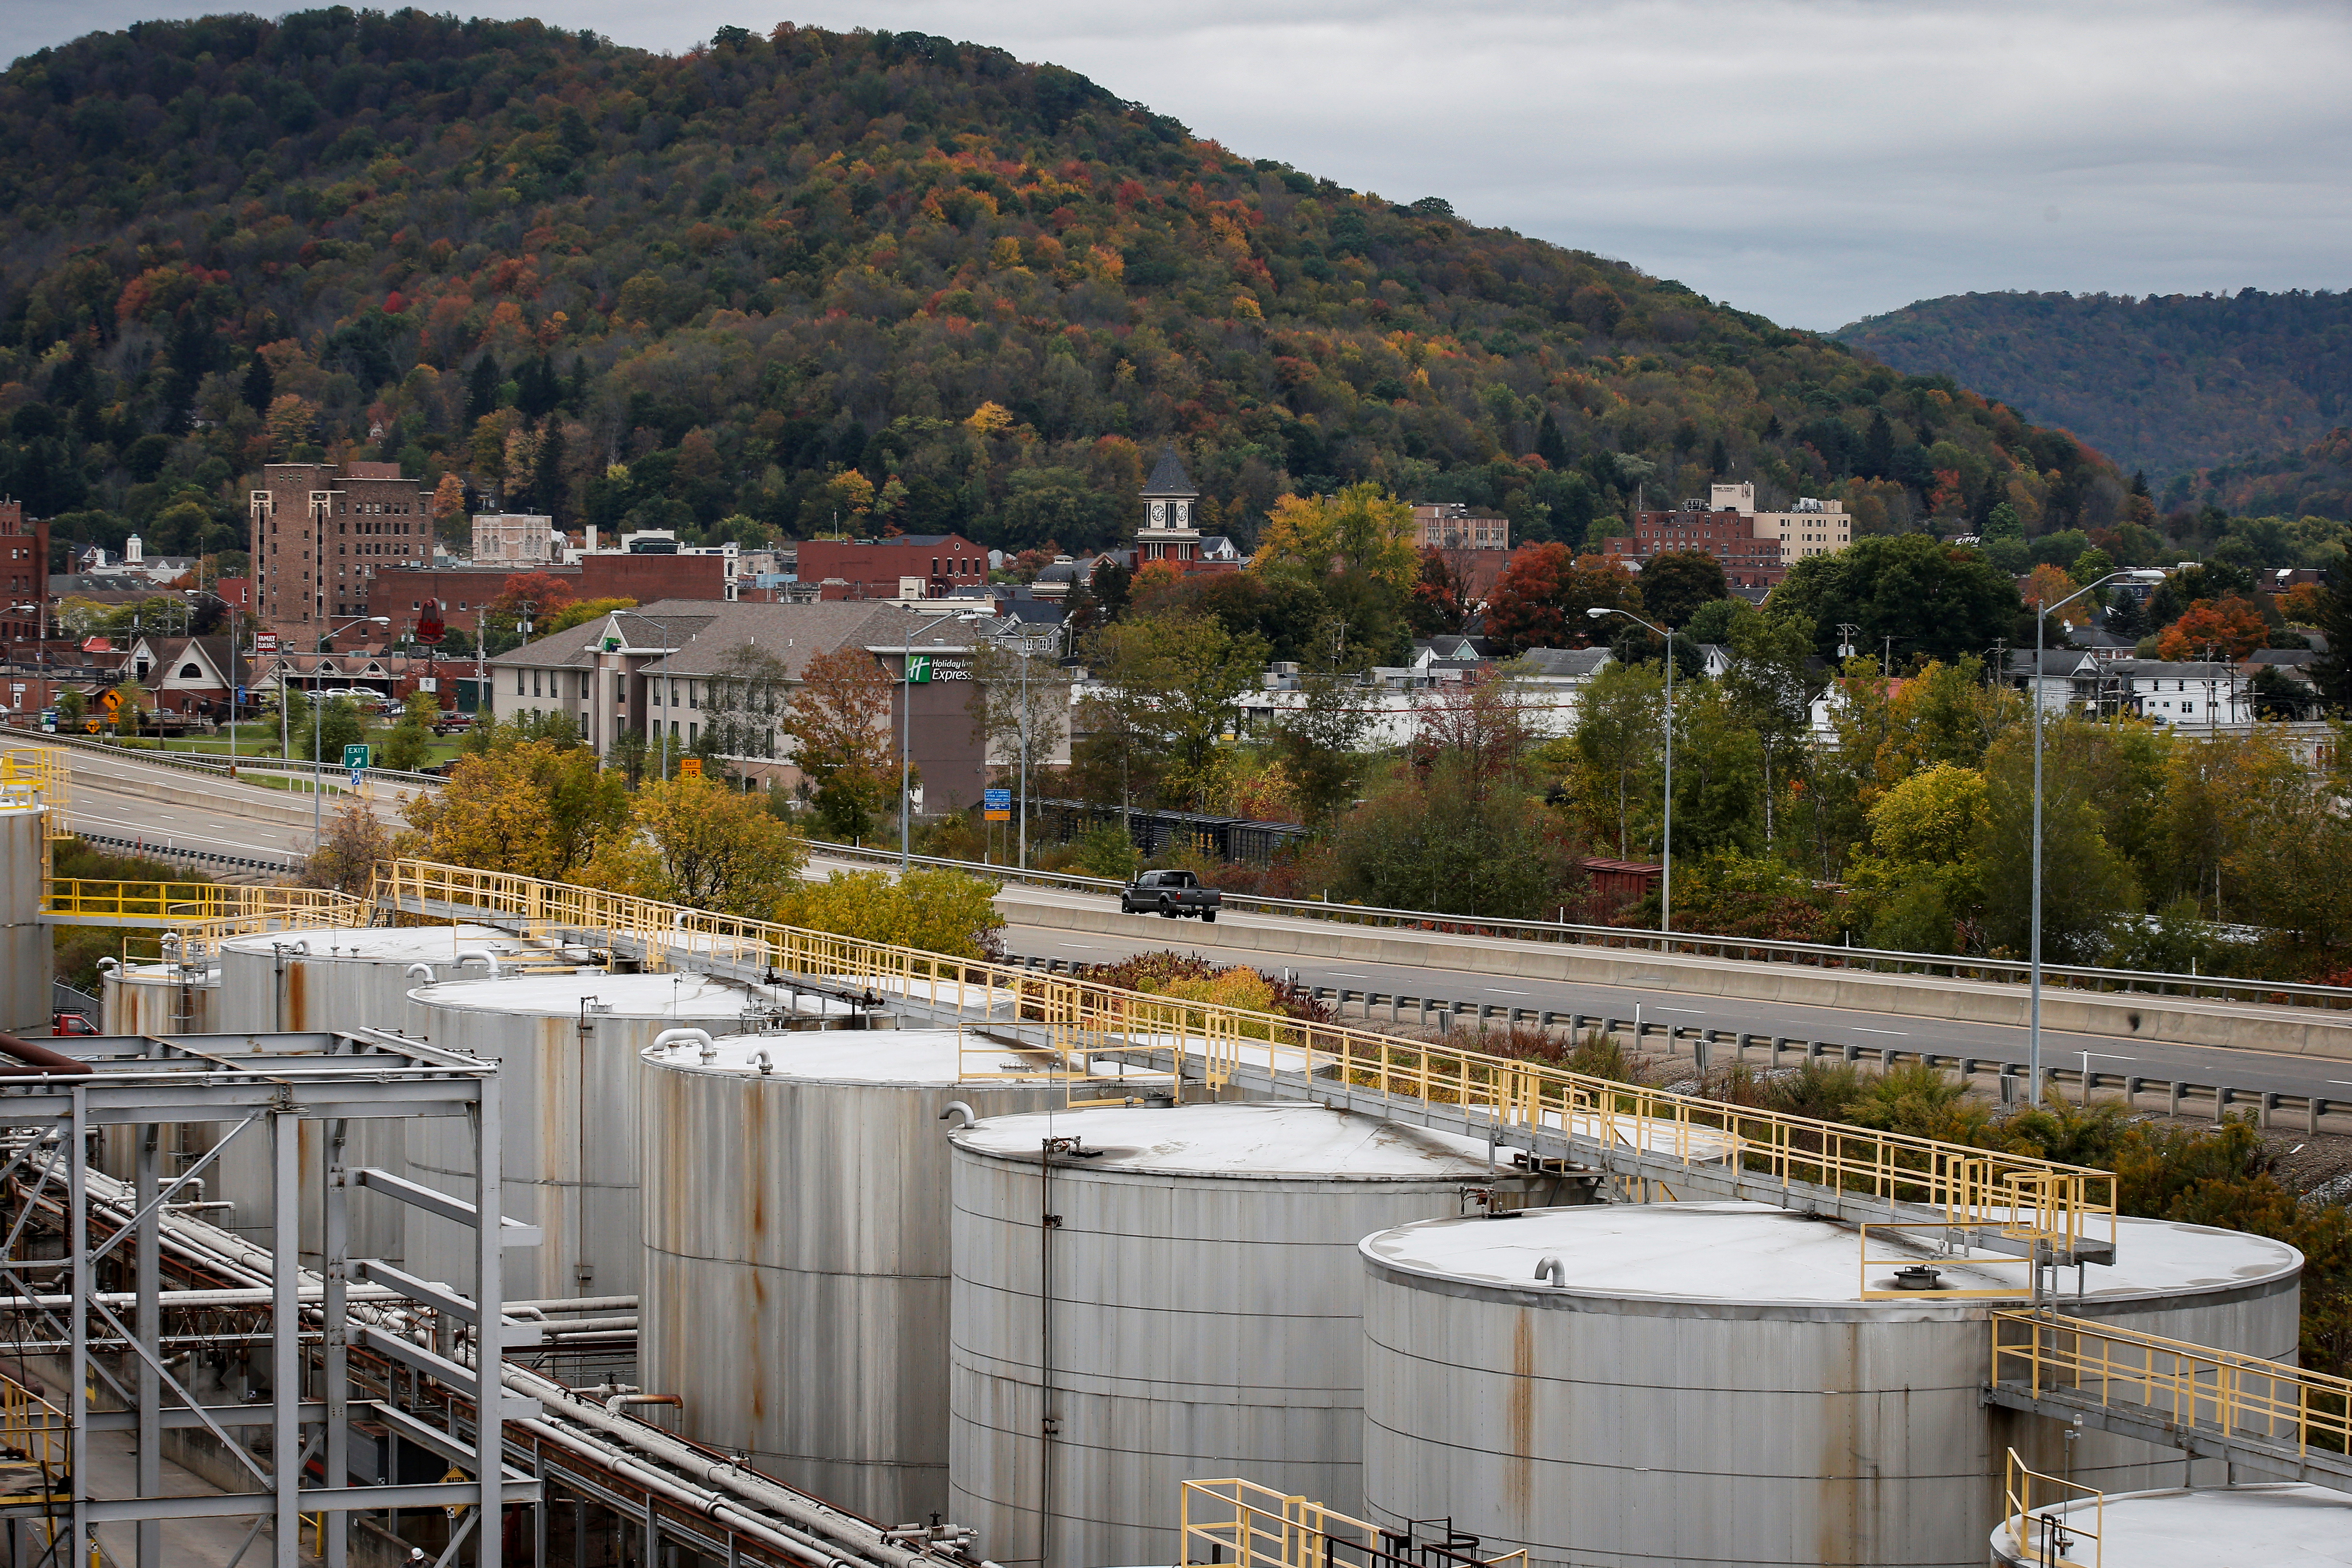 Holding tanks are seen at the American Refining Group, Inc. refinery in Bradford, Pennsylvania, United States